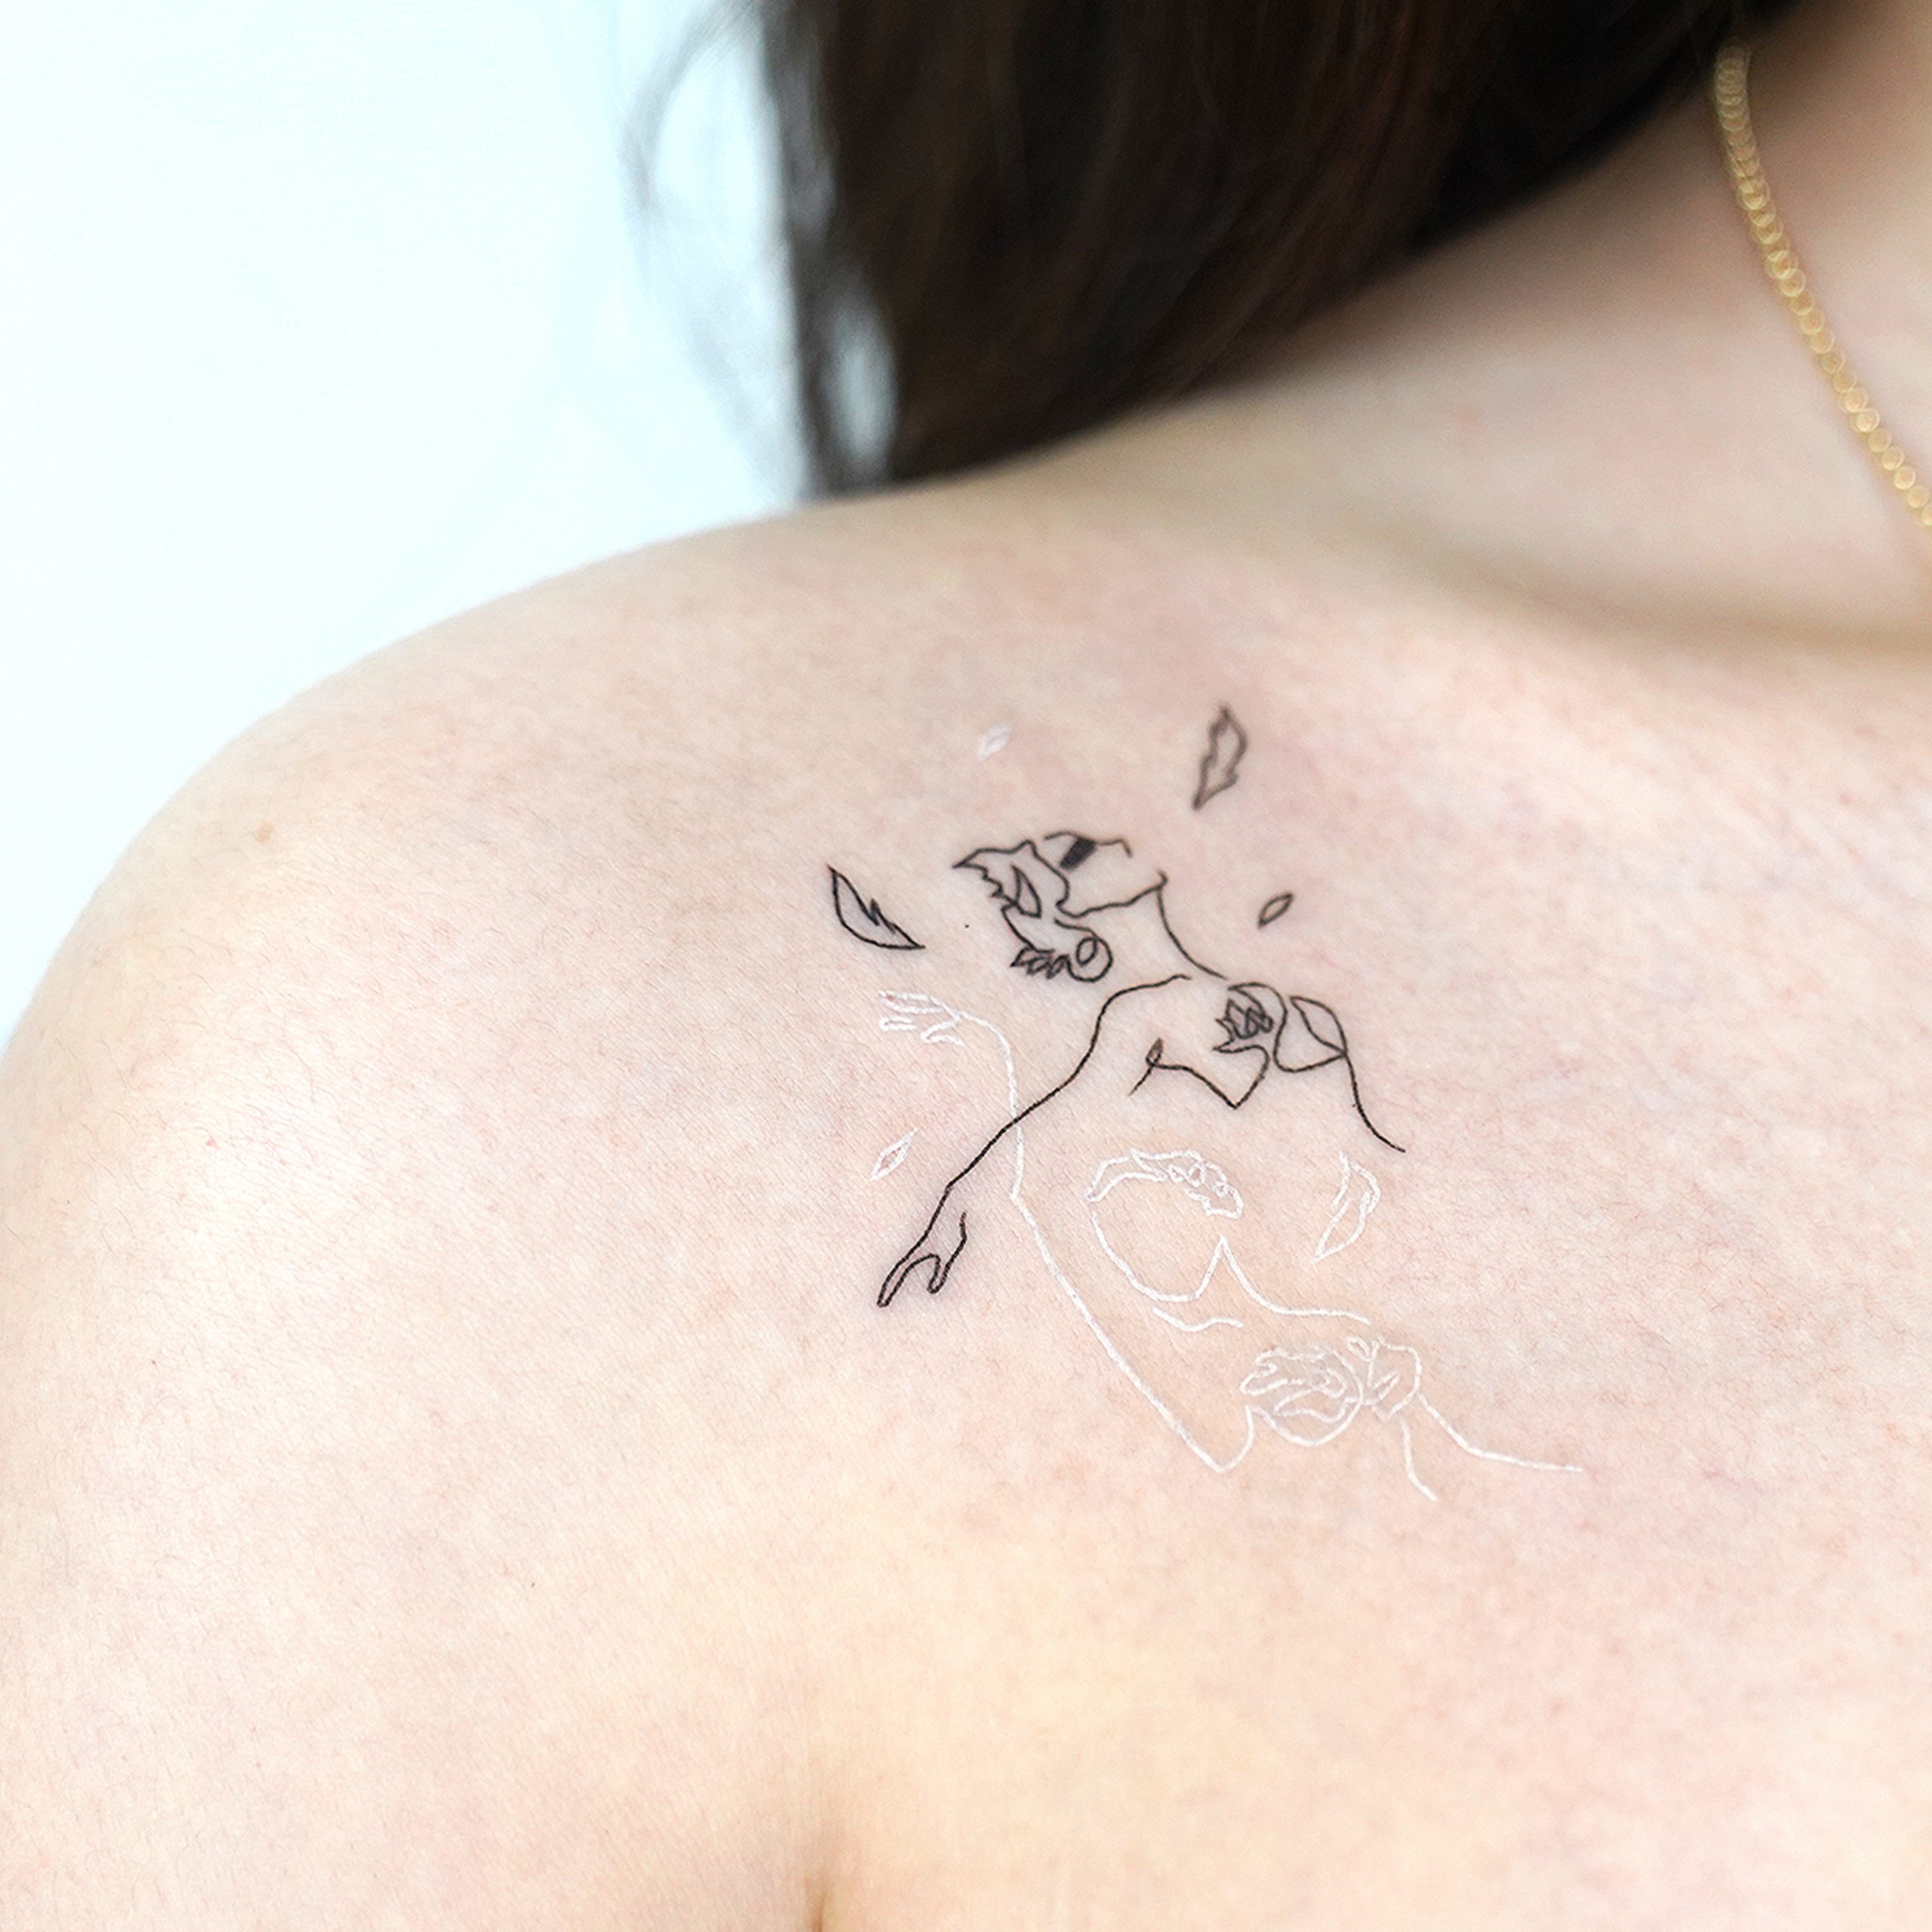 85 Animal Tattoos That Could Snap Some Creative Ideas Into Your Head   Bored Panda